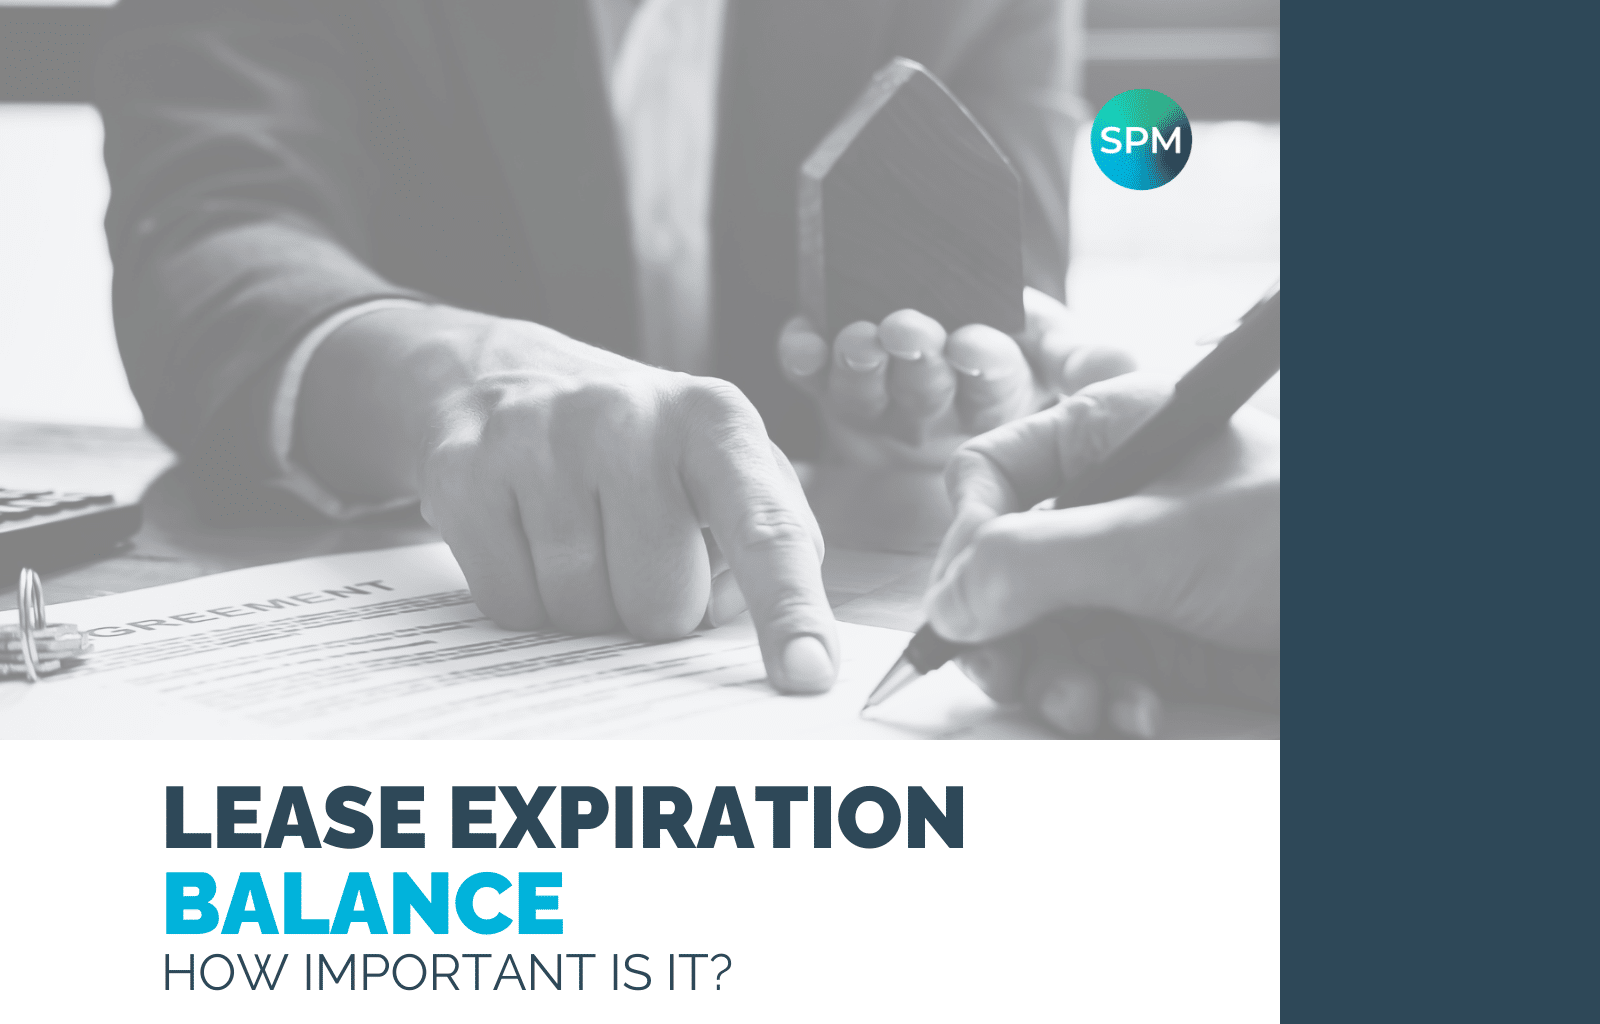 Lease Expiration Balance - How important is it